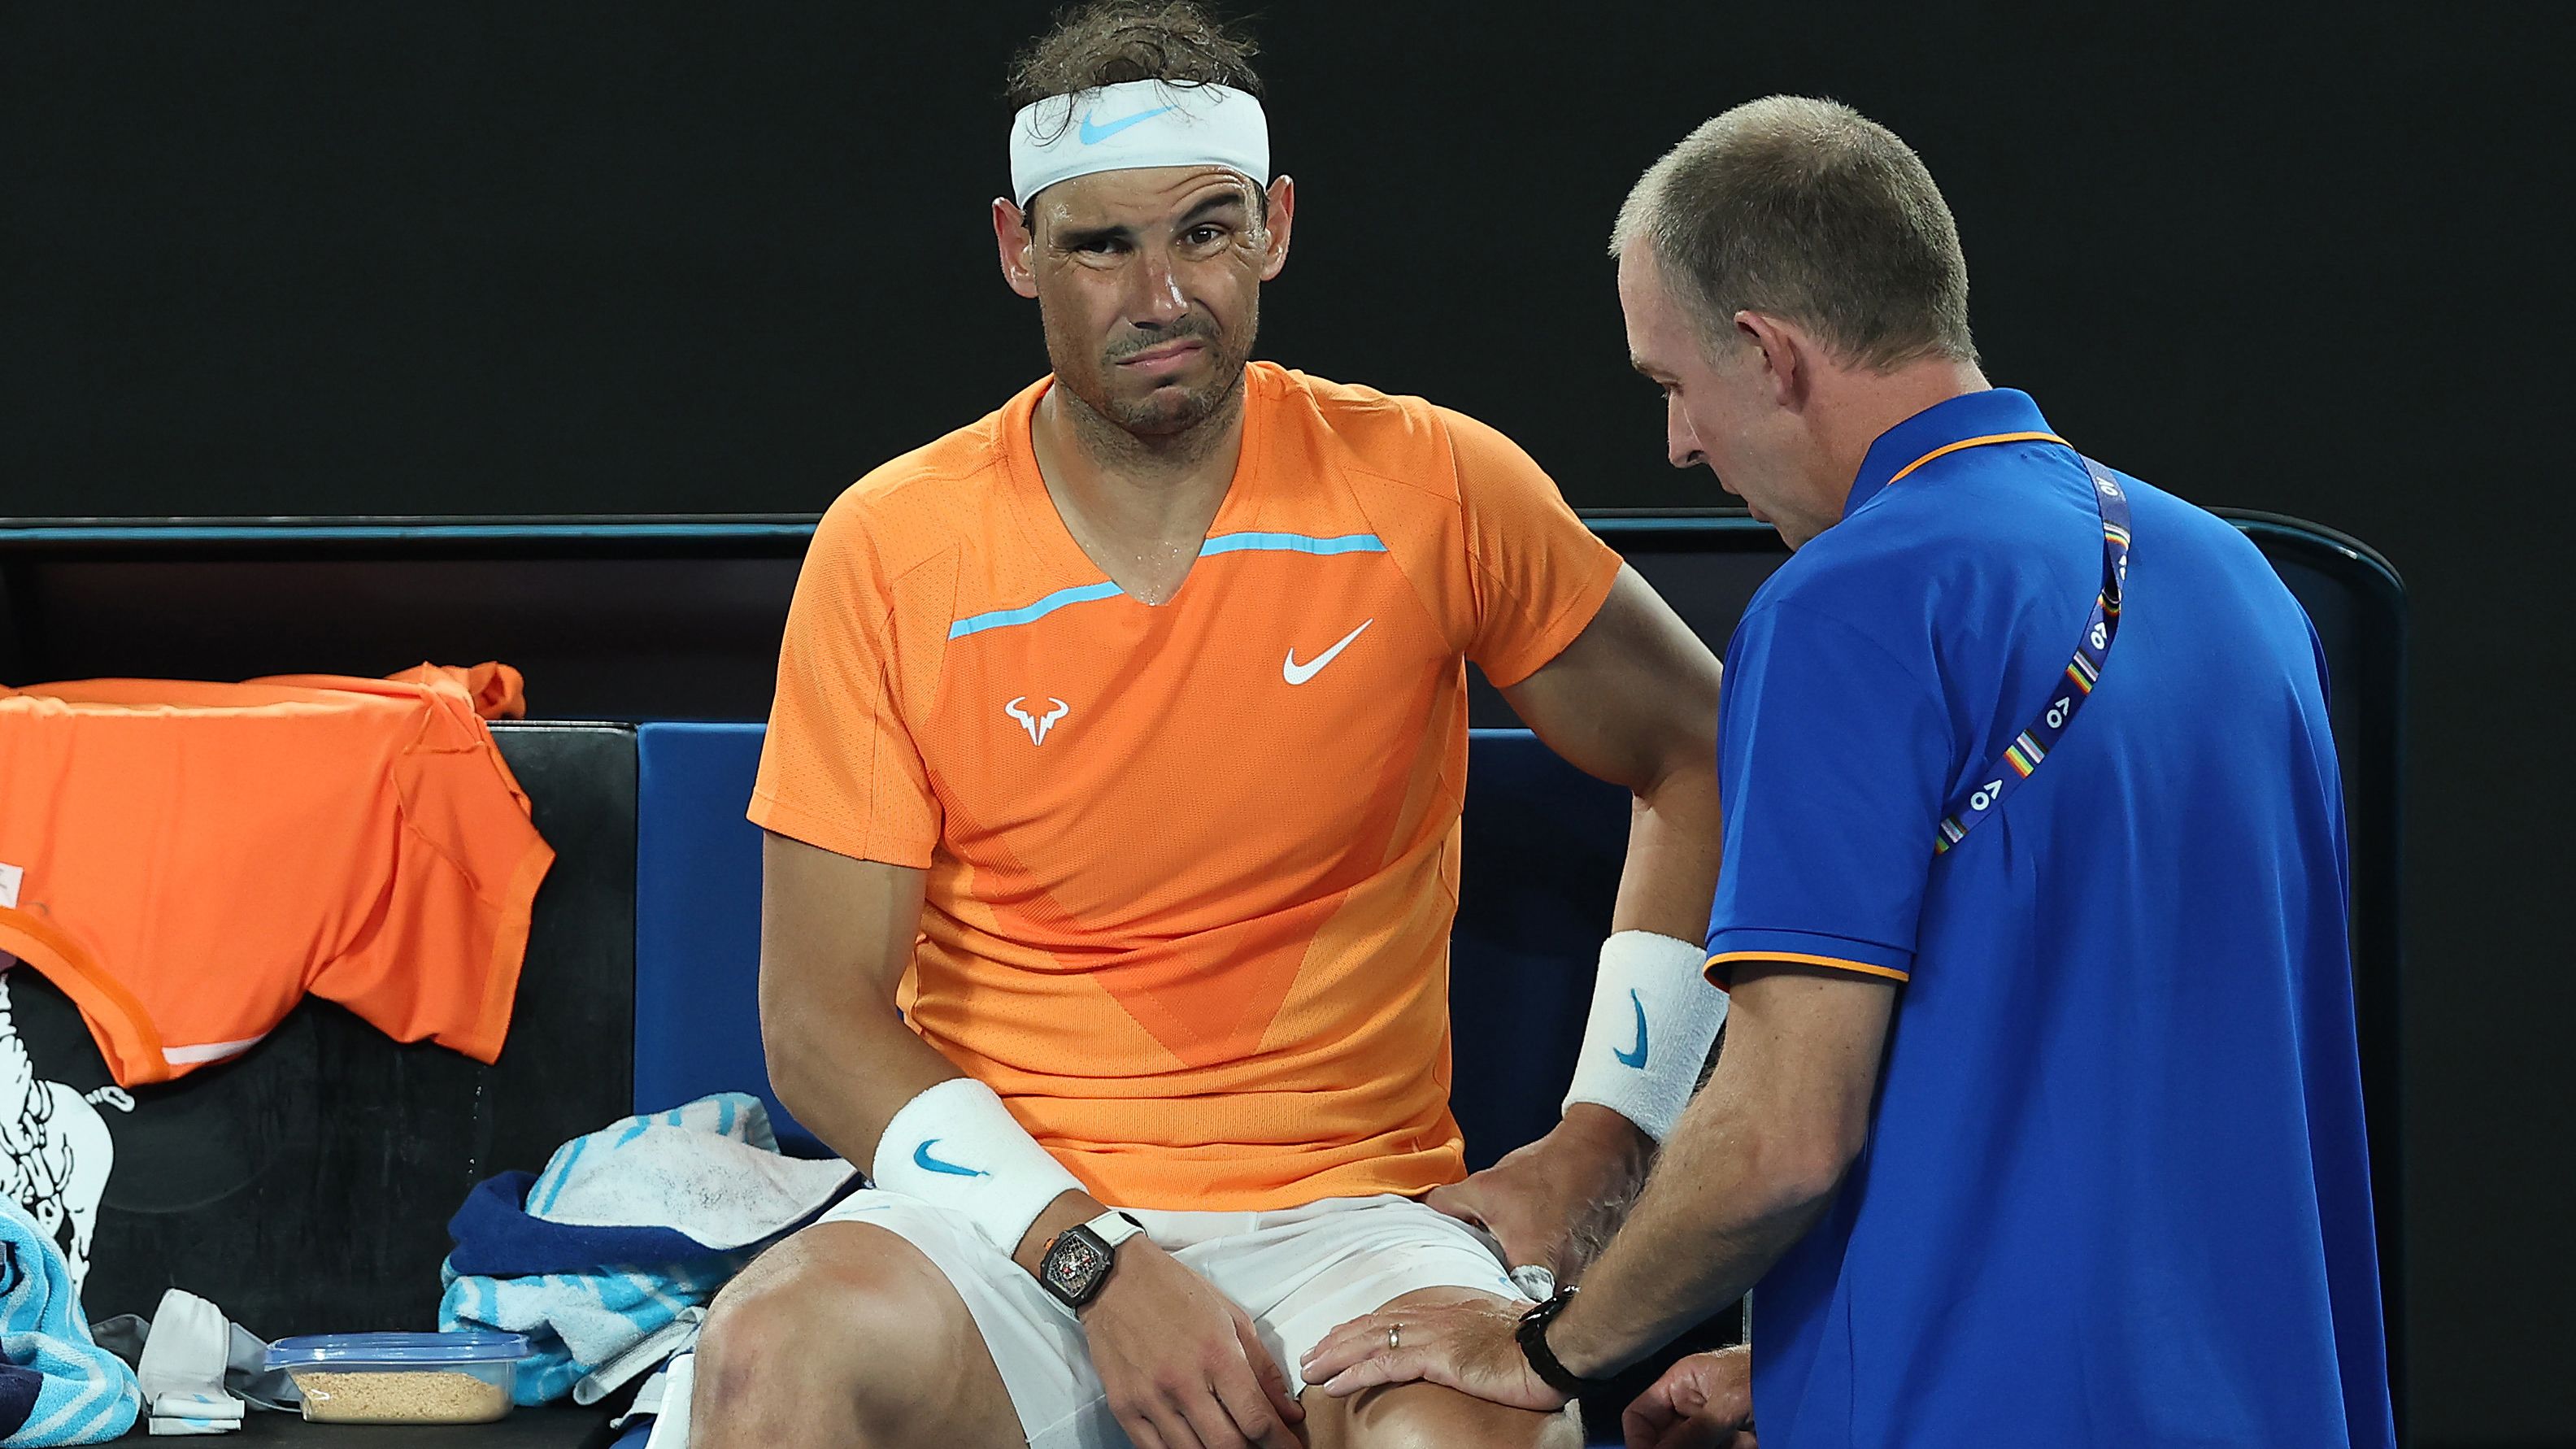 MELBOURNE, AUSTRALIA - JANUARY 18: Rafael Nadal of Spain receives attention during a medical time out in their round two singles match against Mackenzie McDonald of the United States during day three of the 2023 Australian Open at Melbourne Park on January 18, 2023 in Melbourne, Australia. (Photo by Cameron Spencer/Getty Images)